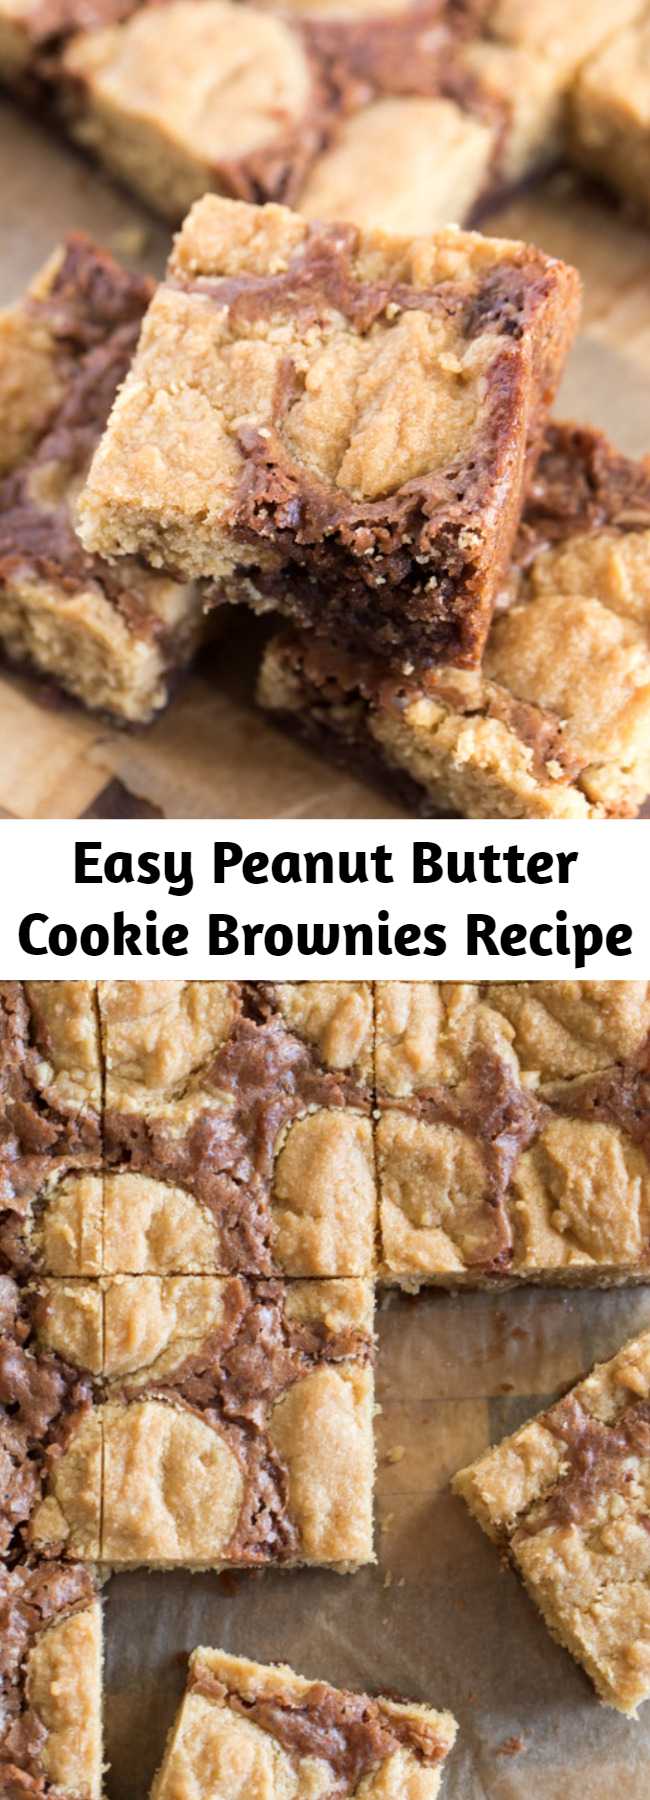 Easy Peanut Butter Cookie Brownies Recipe - An easy homemade brownie batter studded with globs of peanut butter cookie dough for a chocolate peanut butter lovers dream come true. These little squares did NOT last long my friends.